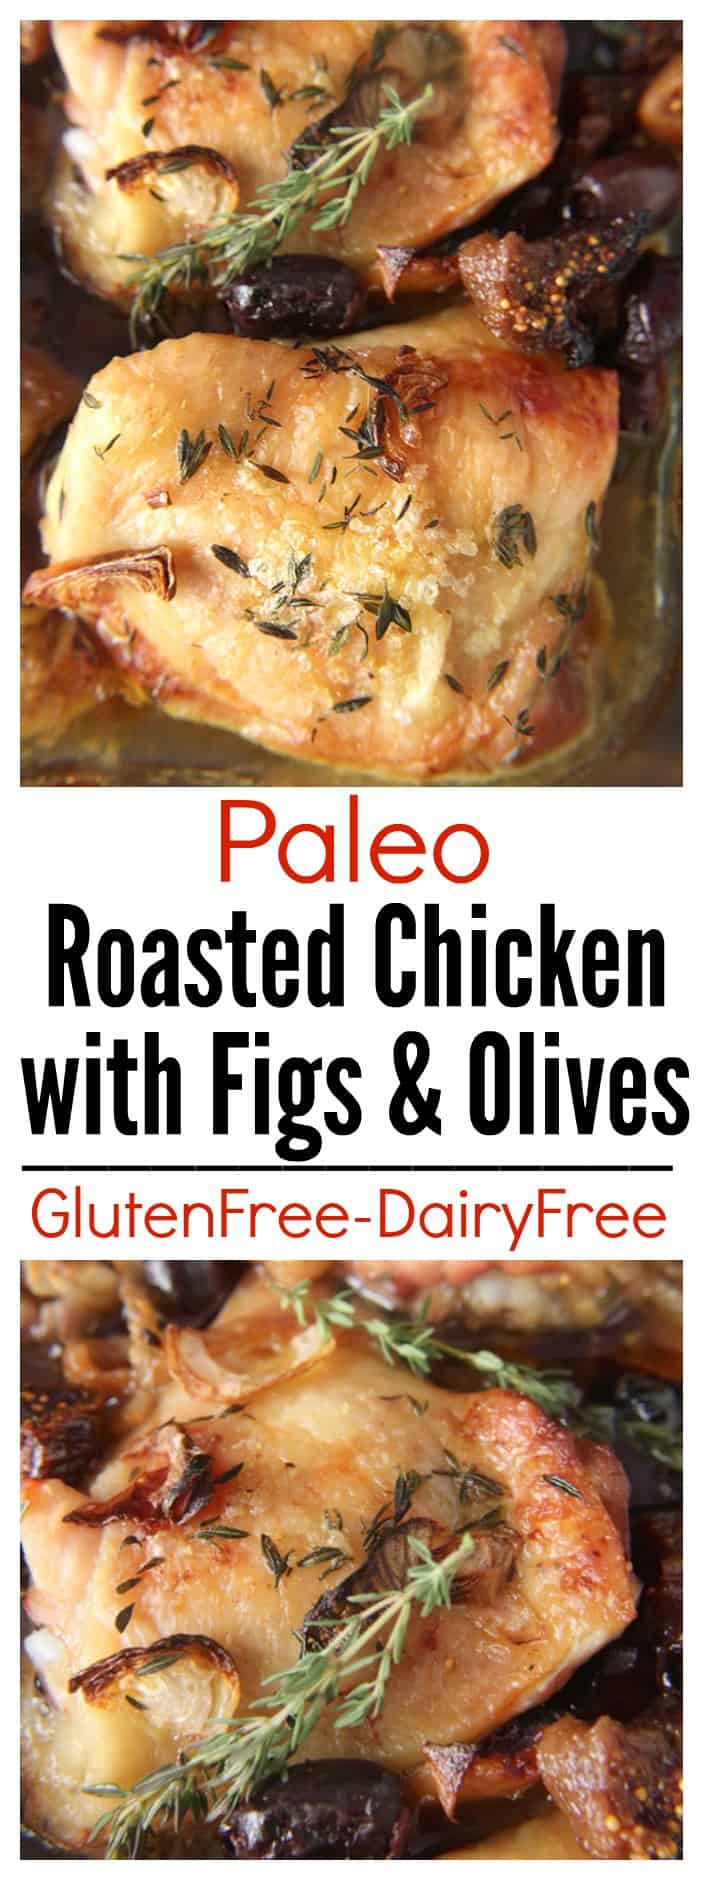 Paleo Roasted Chicken with Figs and Olives